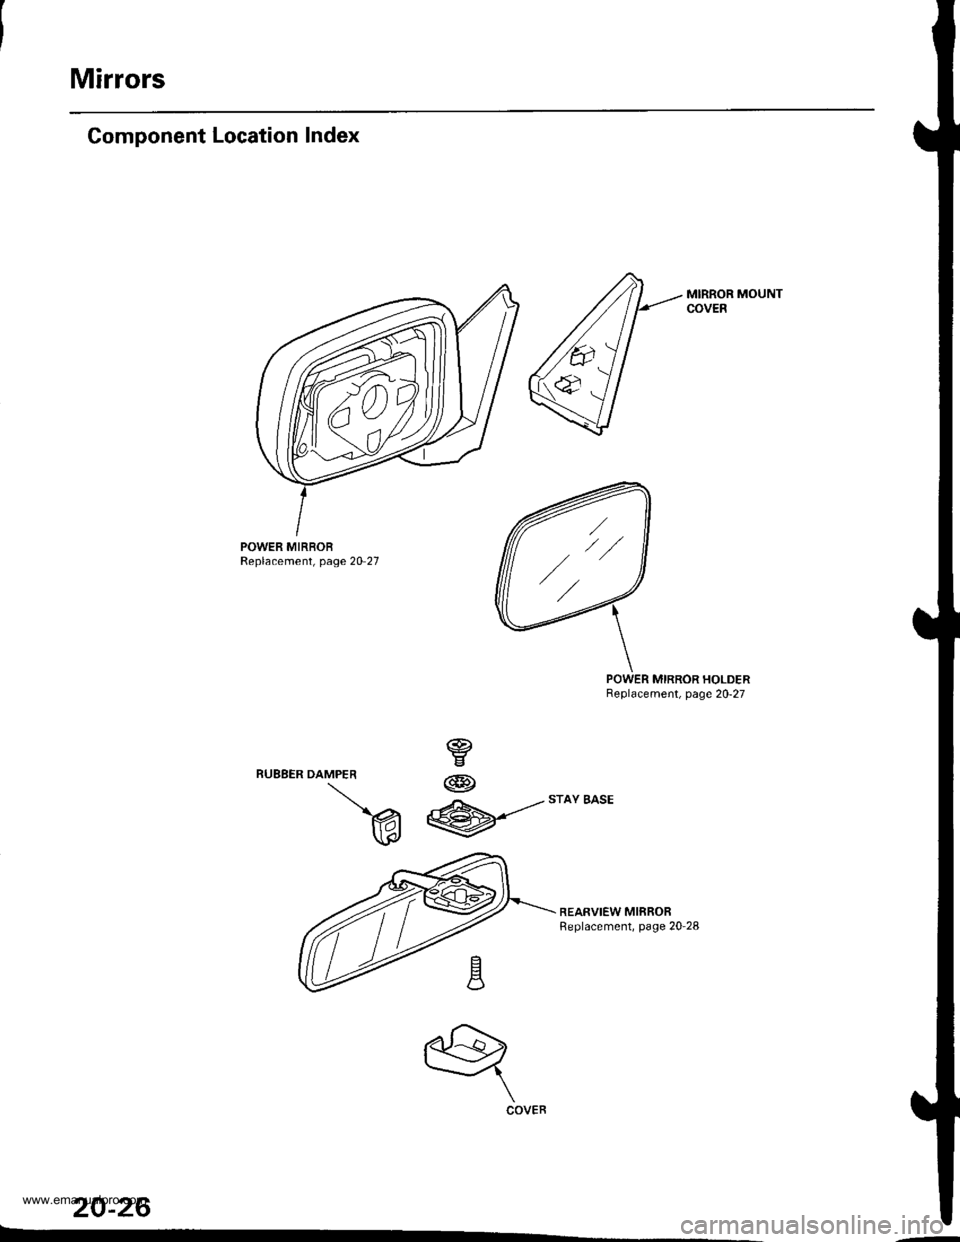 HONDA CR-V 1998 RD1-RD3 / 1.G Workshop Manual 
Mirrors
Component Location Index
MIRROR MOUNTCOVEB
POWER MIRBORReplacement, page 20 27
MIRROR HOLDERBeplacement, page 20-27
REARVIEW MIRRORReplacement, page 20-28
20-26
DAMPER
v
W
@
@
w
q
COVER
,//
w